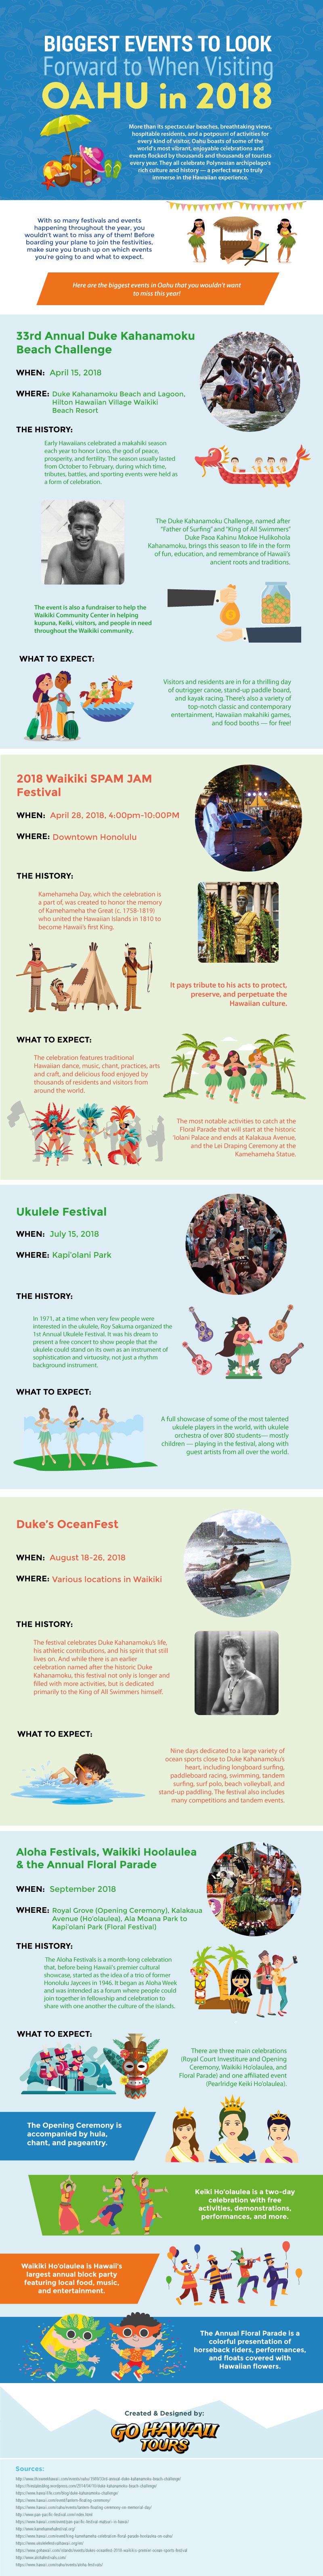 Biggest events to look forward to when visiting Oahu in 2018 - Infographic Image